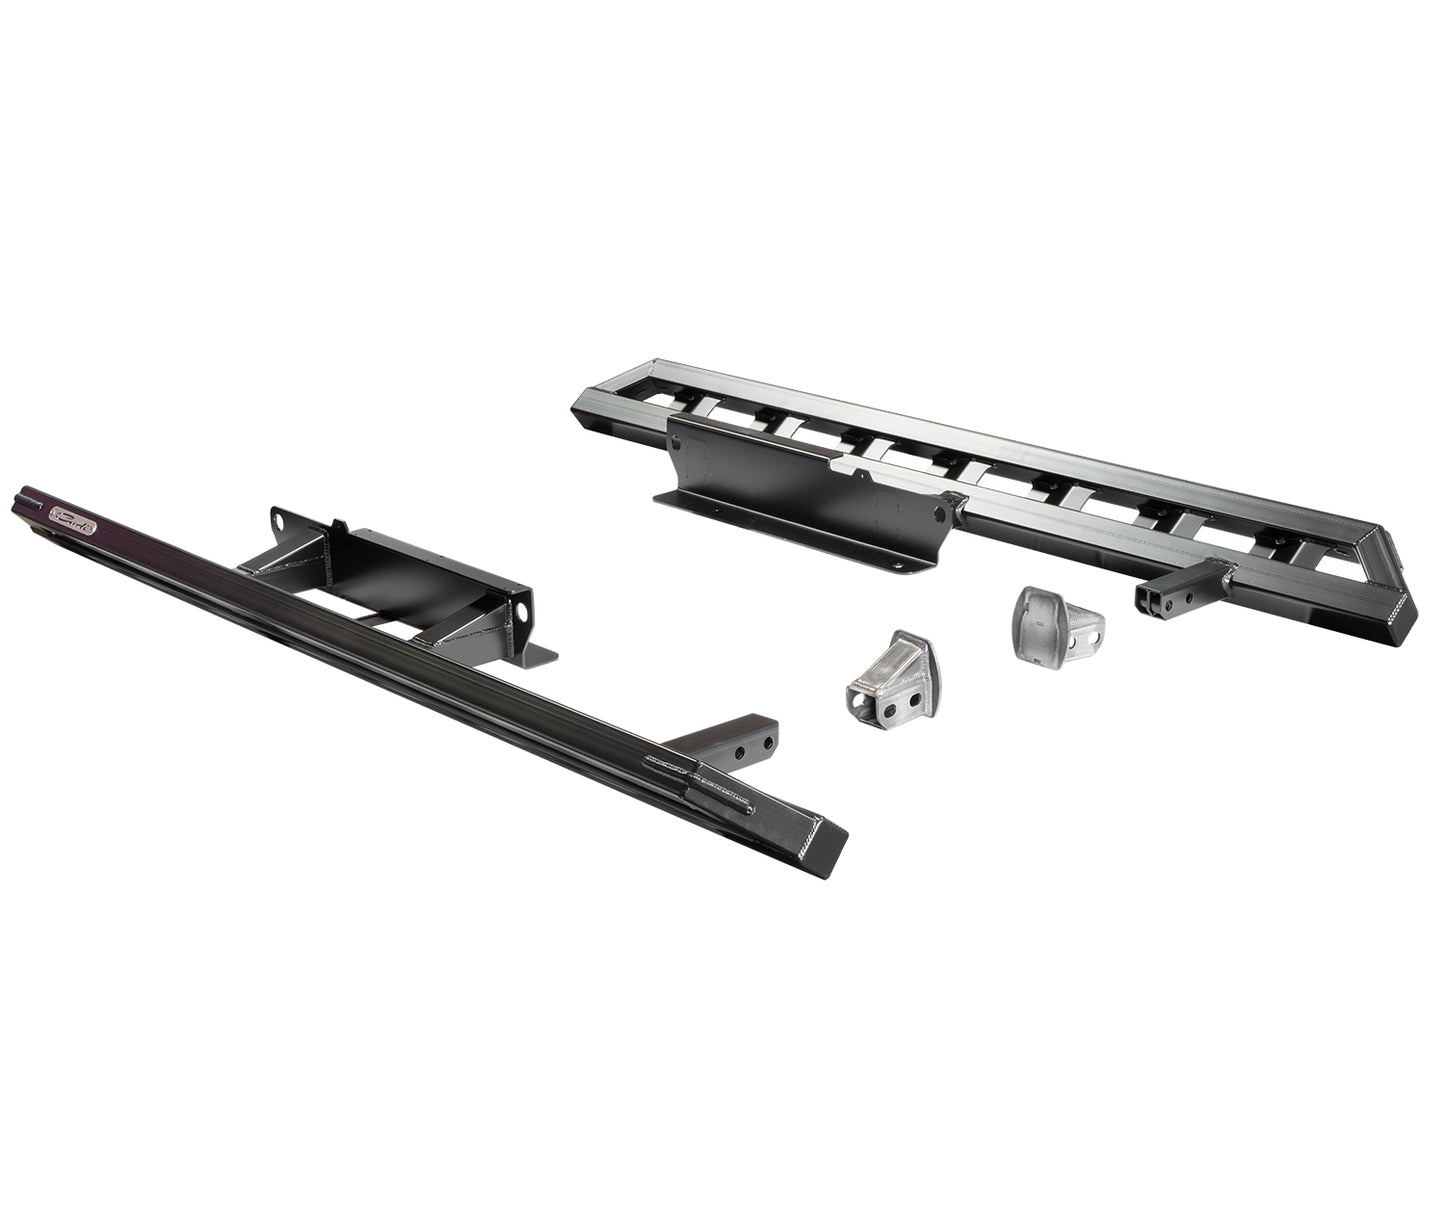 Carli 2021-2023 Ford Bronco LIft Kit - Build Your Kit To See Price